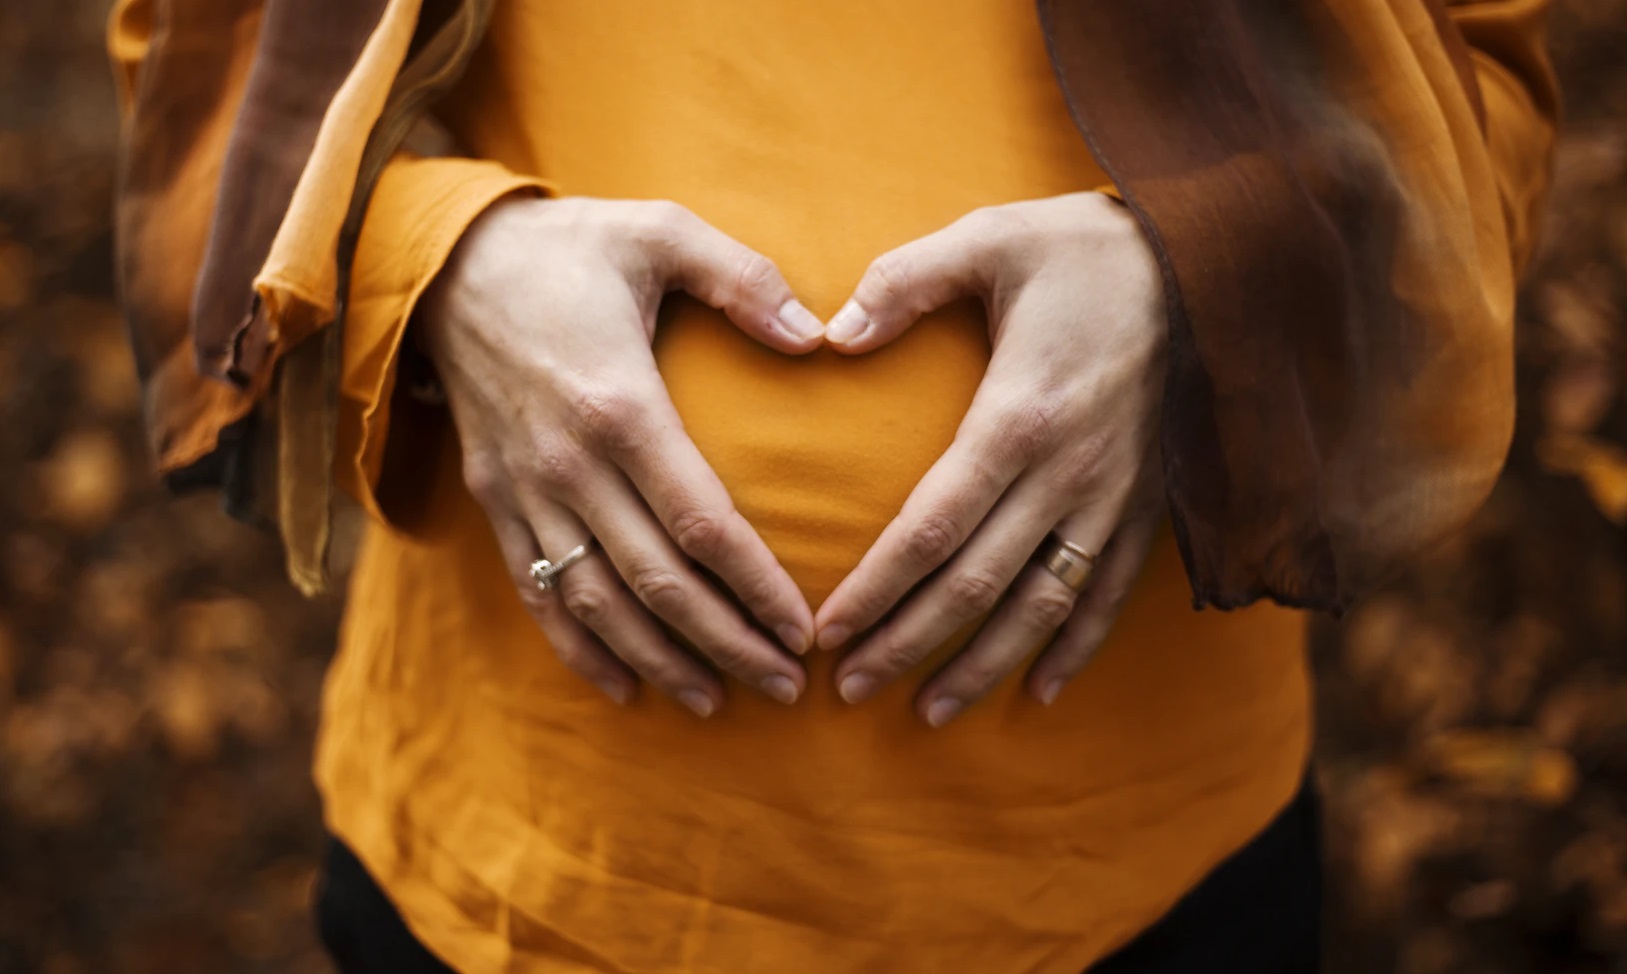 Stomach of pregnant woman with hands making heart sign